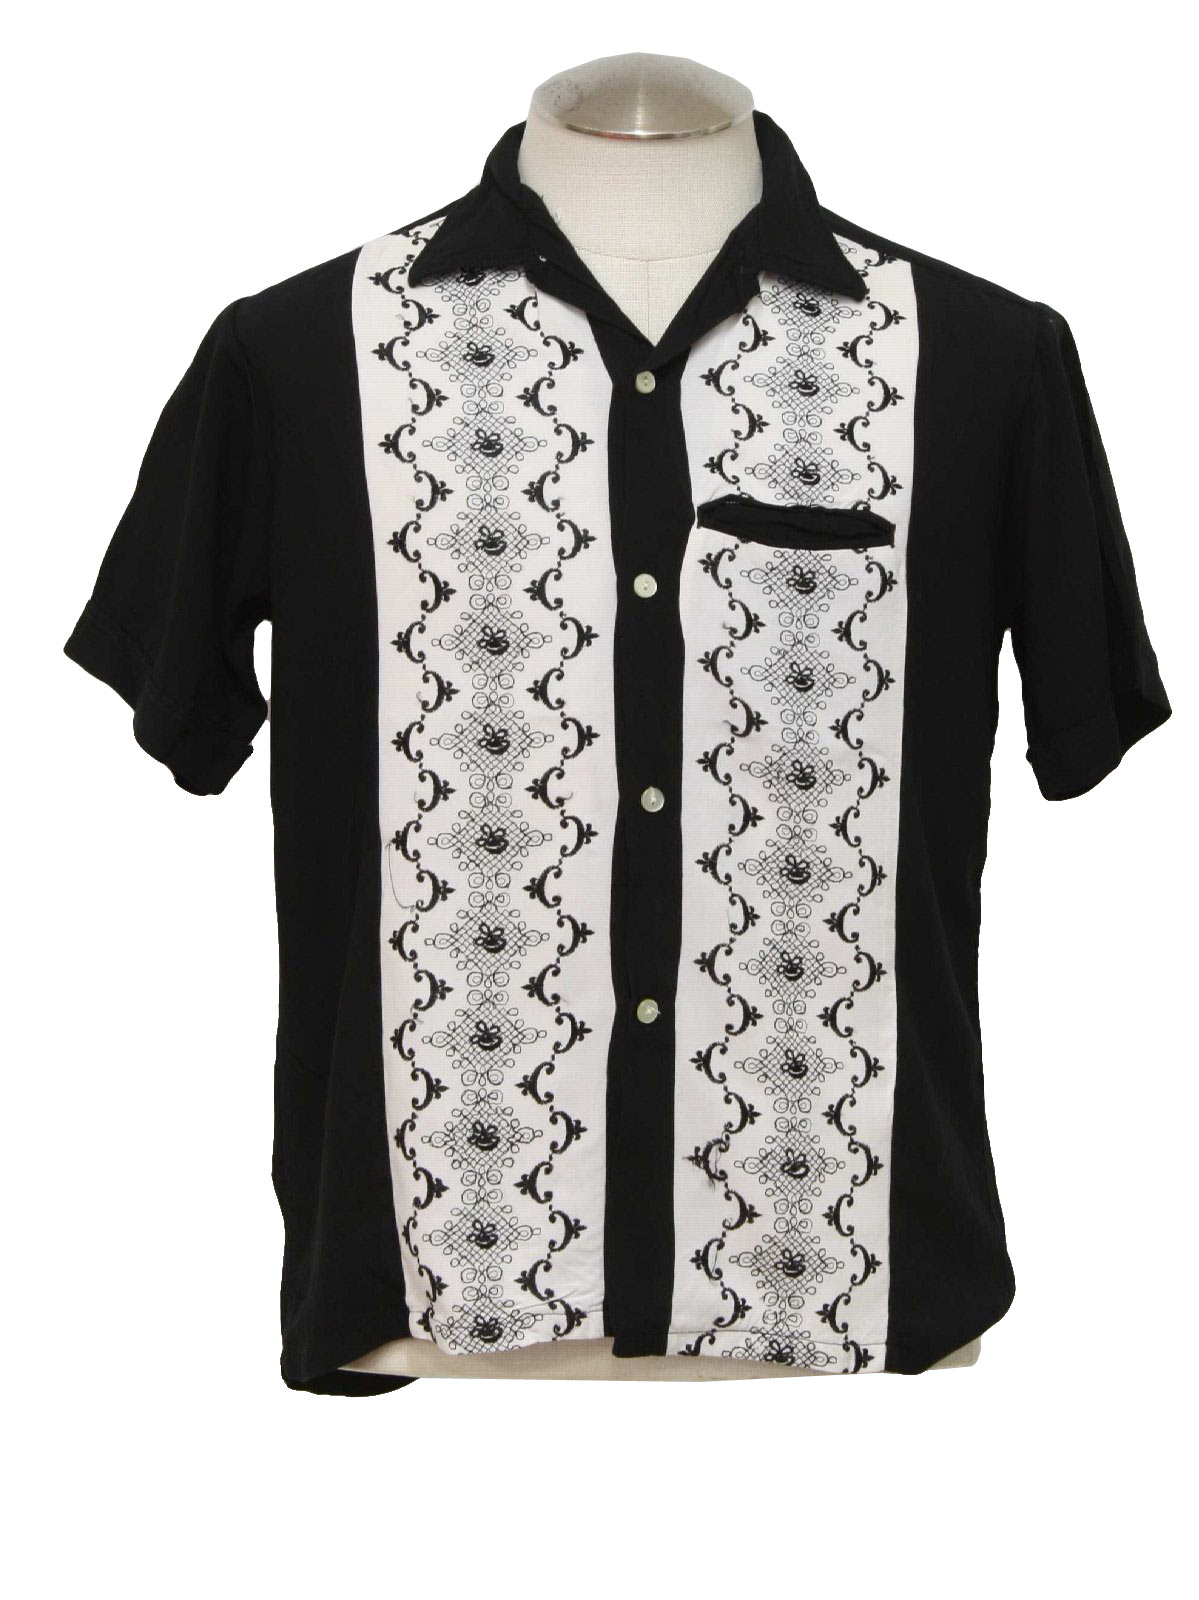 Vintage 50s Shirt: Late 50s -International Collection by Campus- Mens ...